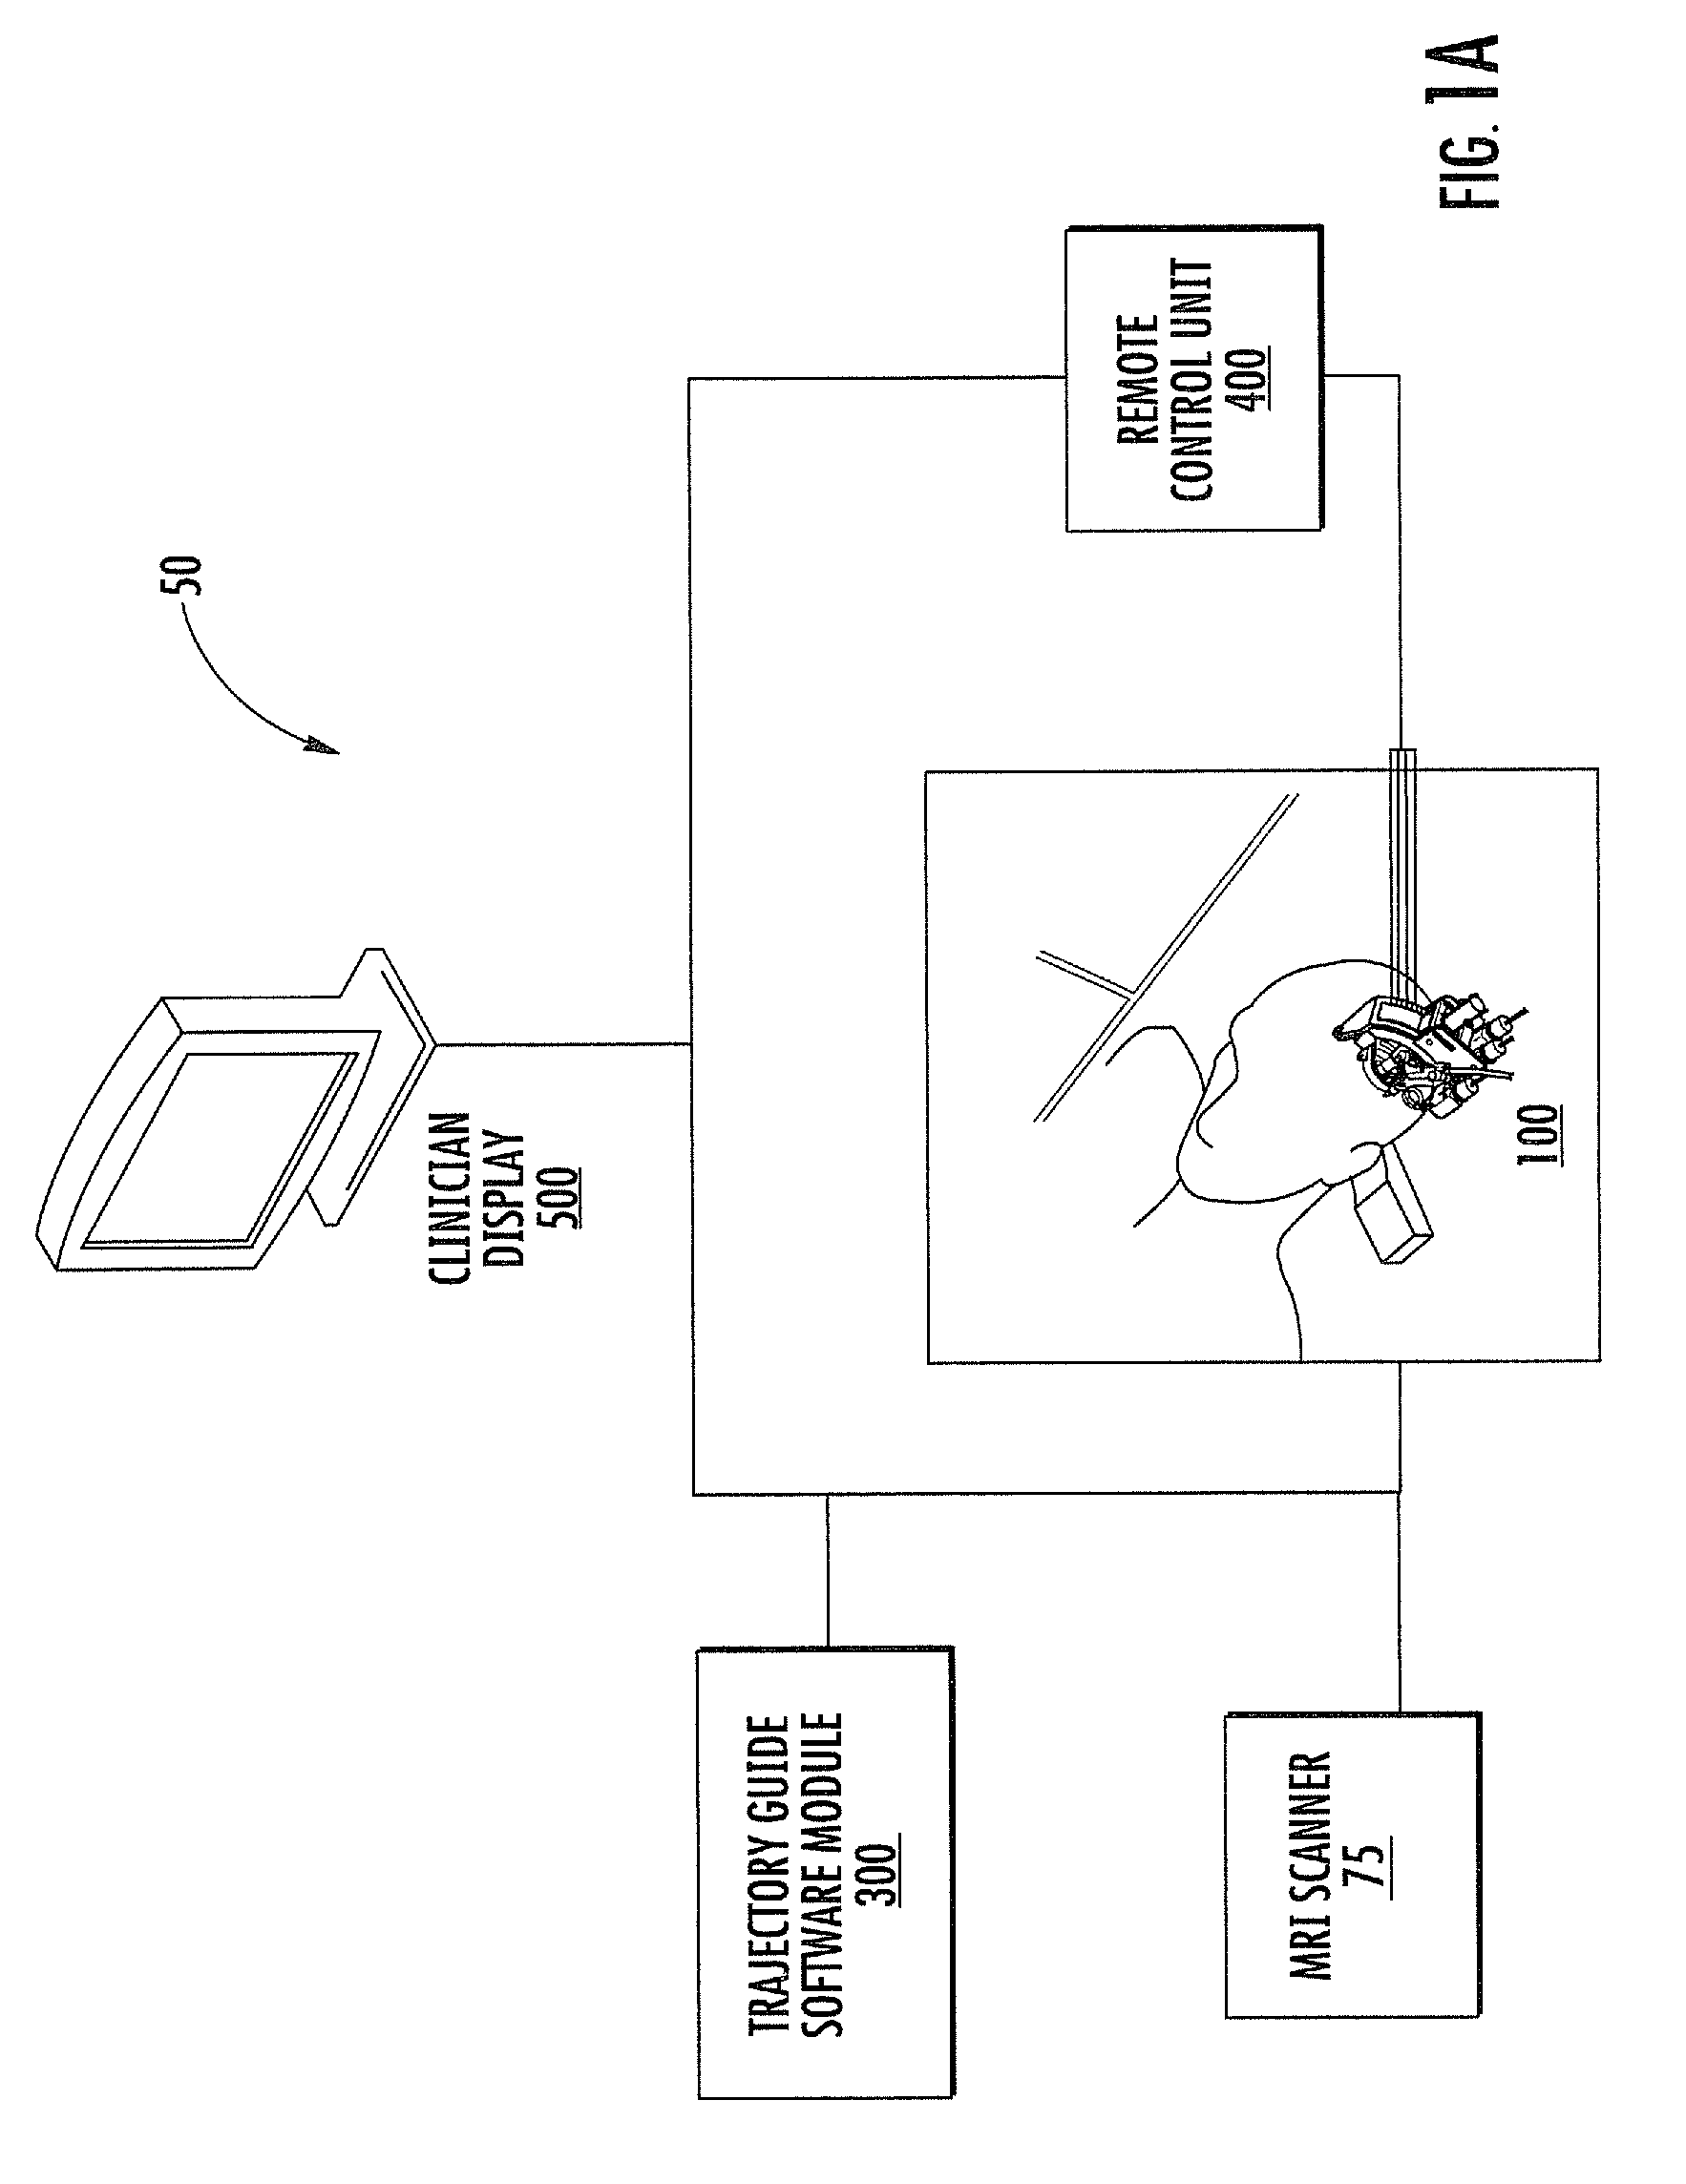 MRI-guided medical interventional systems and methods